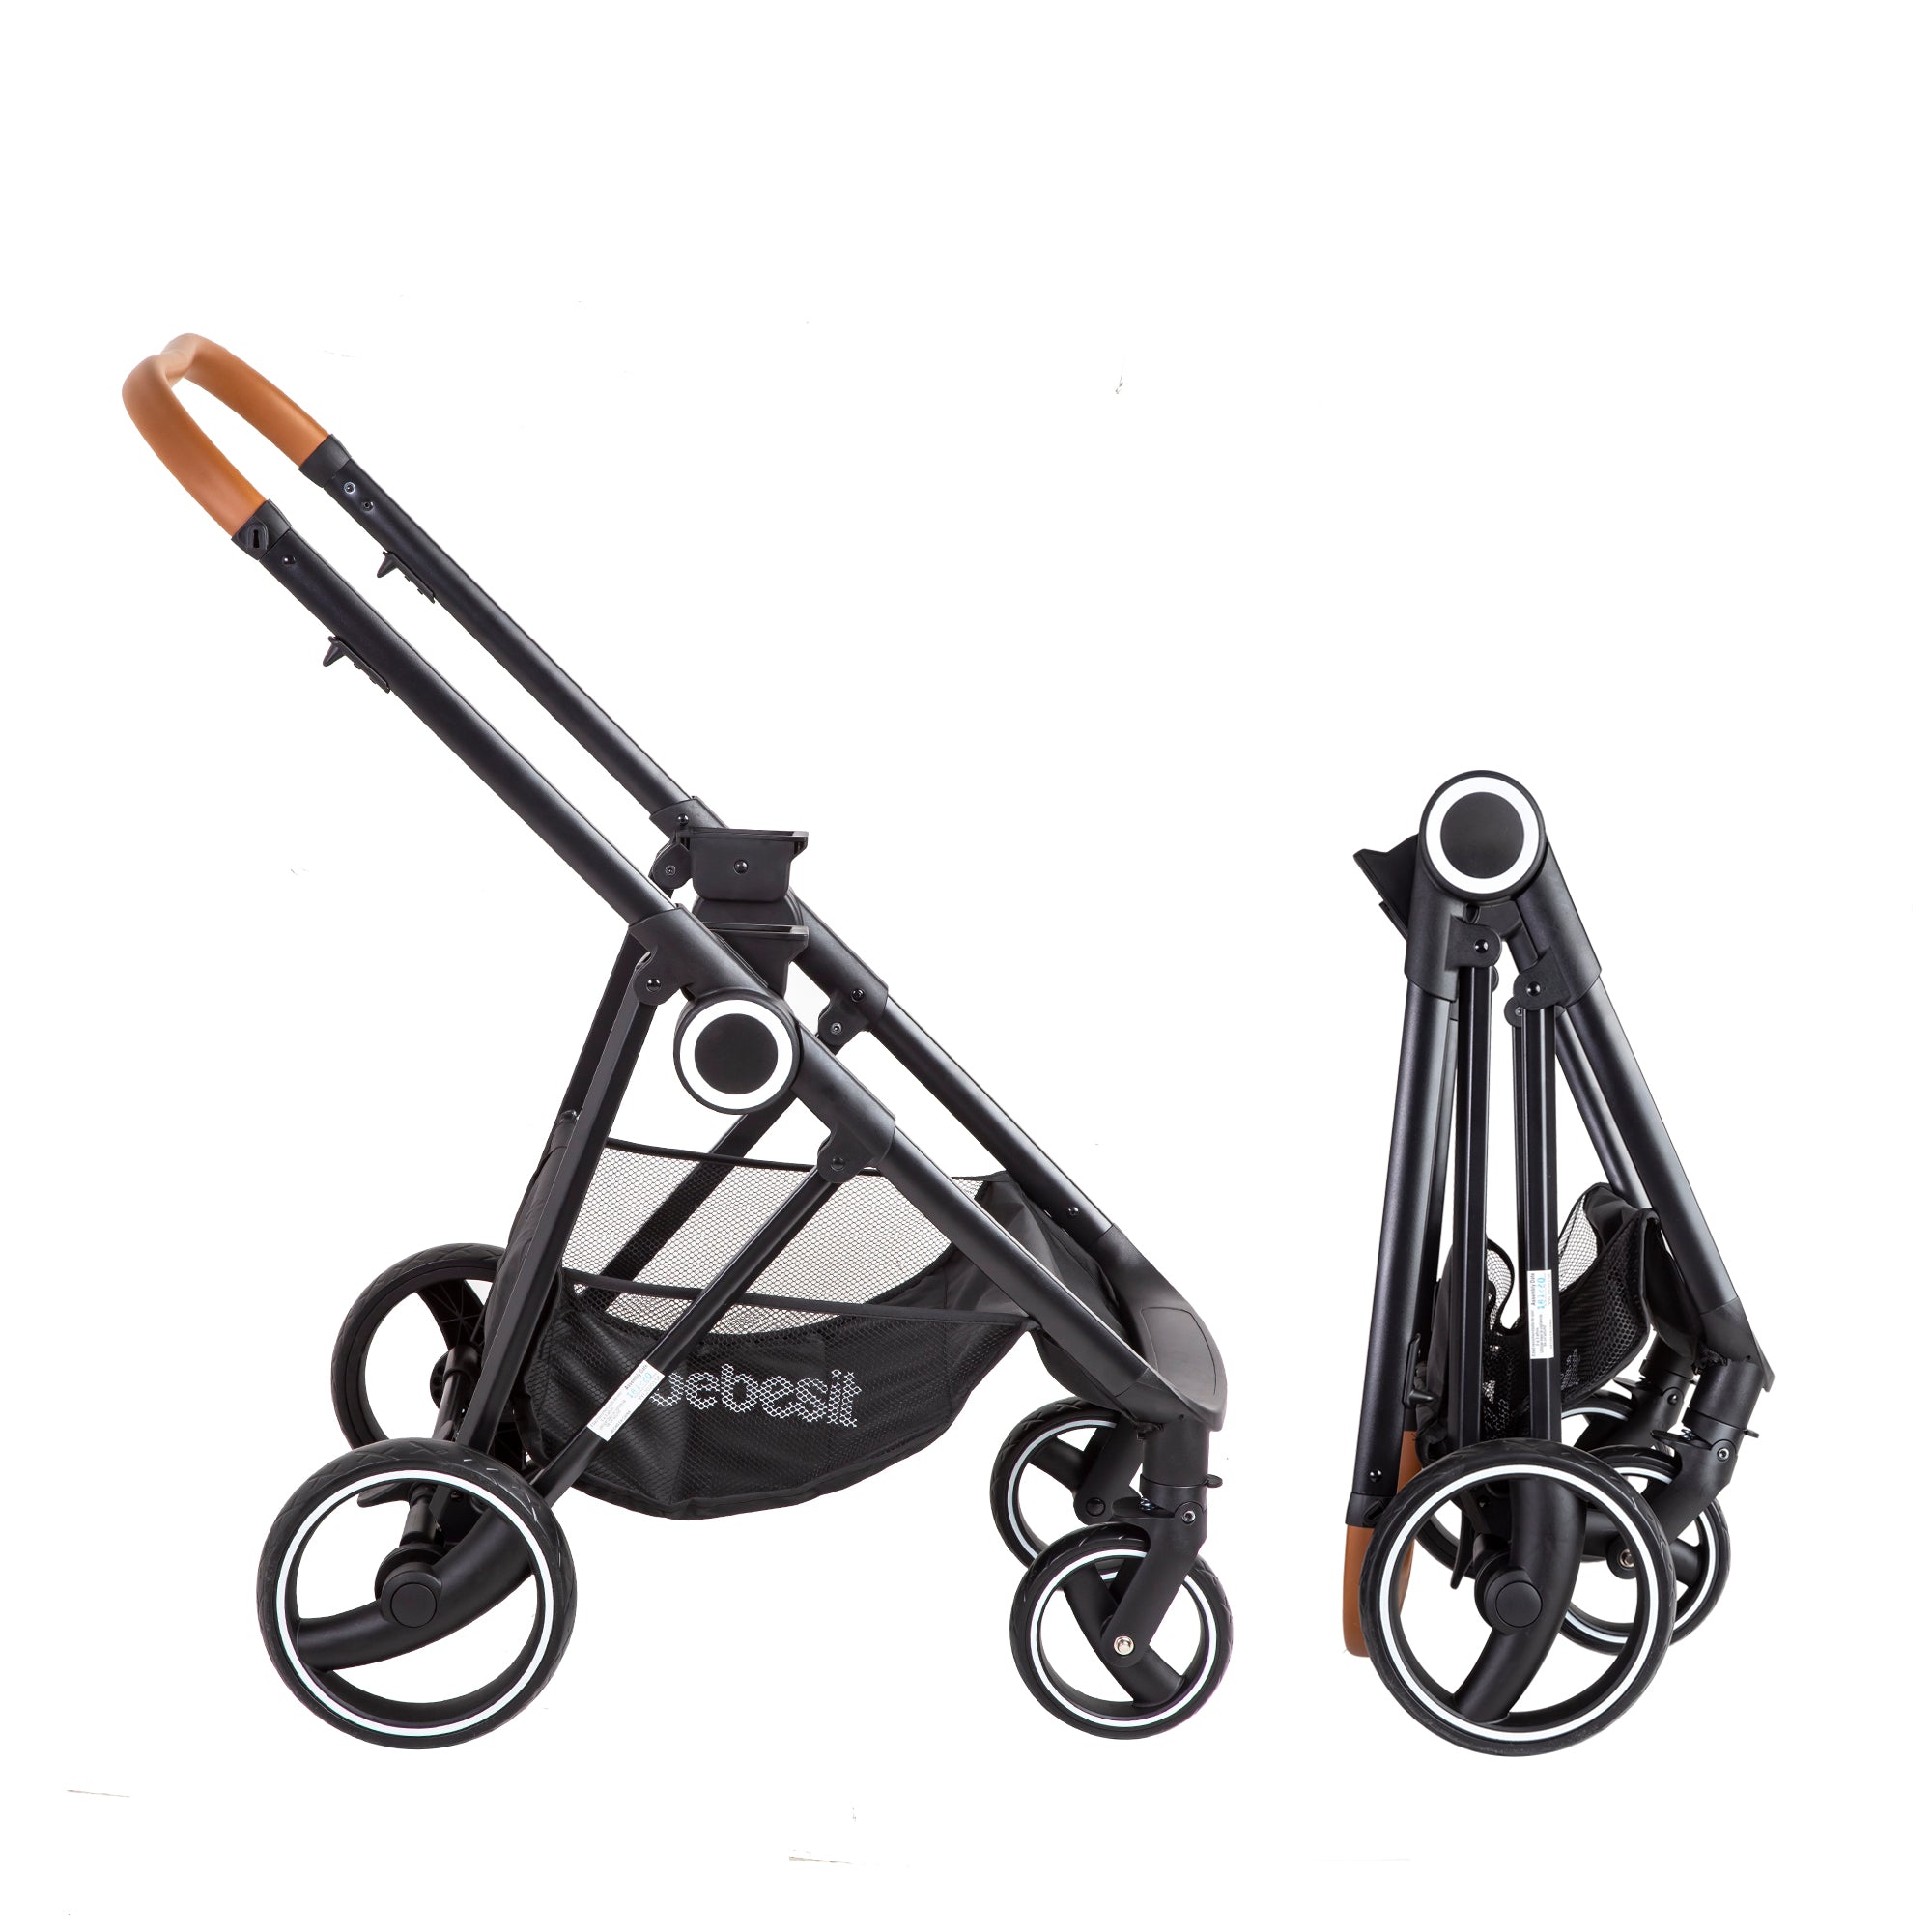 Coche Cuna travel system Cosmos Gris